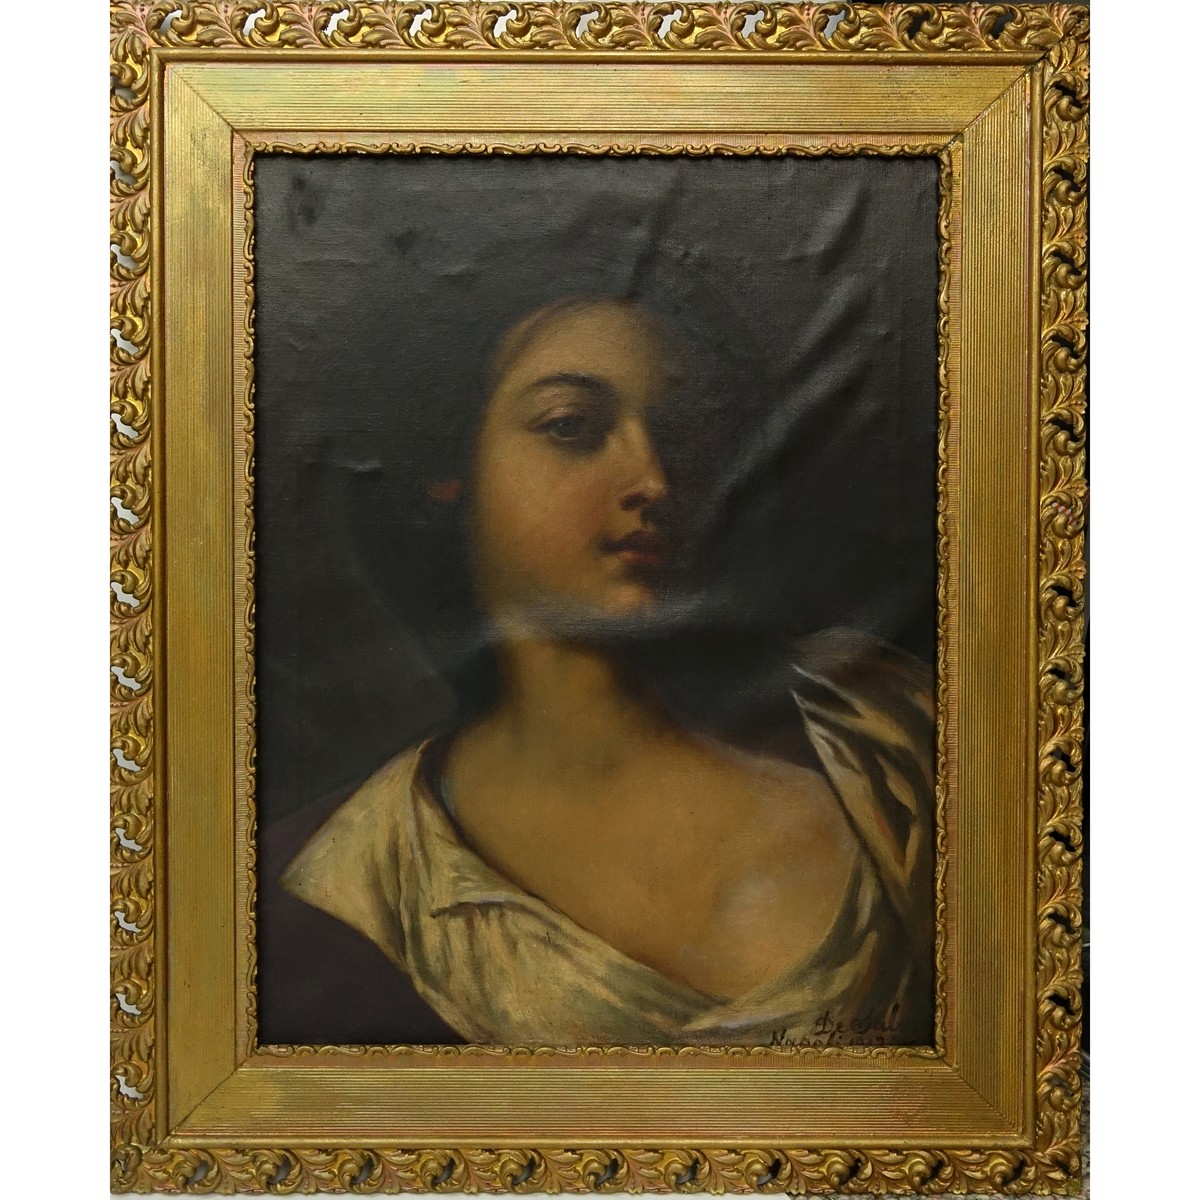 M A De Salvin, Italian (19/20th C) Oil on Canvas, Portrait of a Young Girl, Signed: De Salvin Napoli and Dated 1912 (Lower Right). Conserved condition, in-painting, relined.